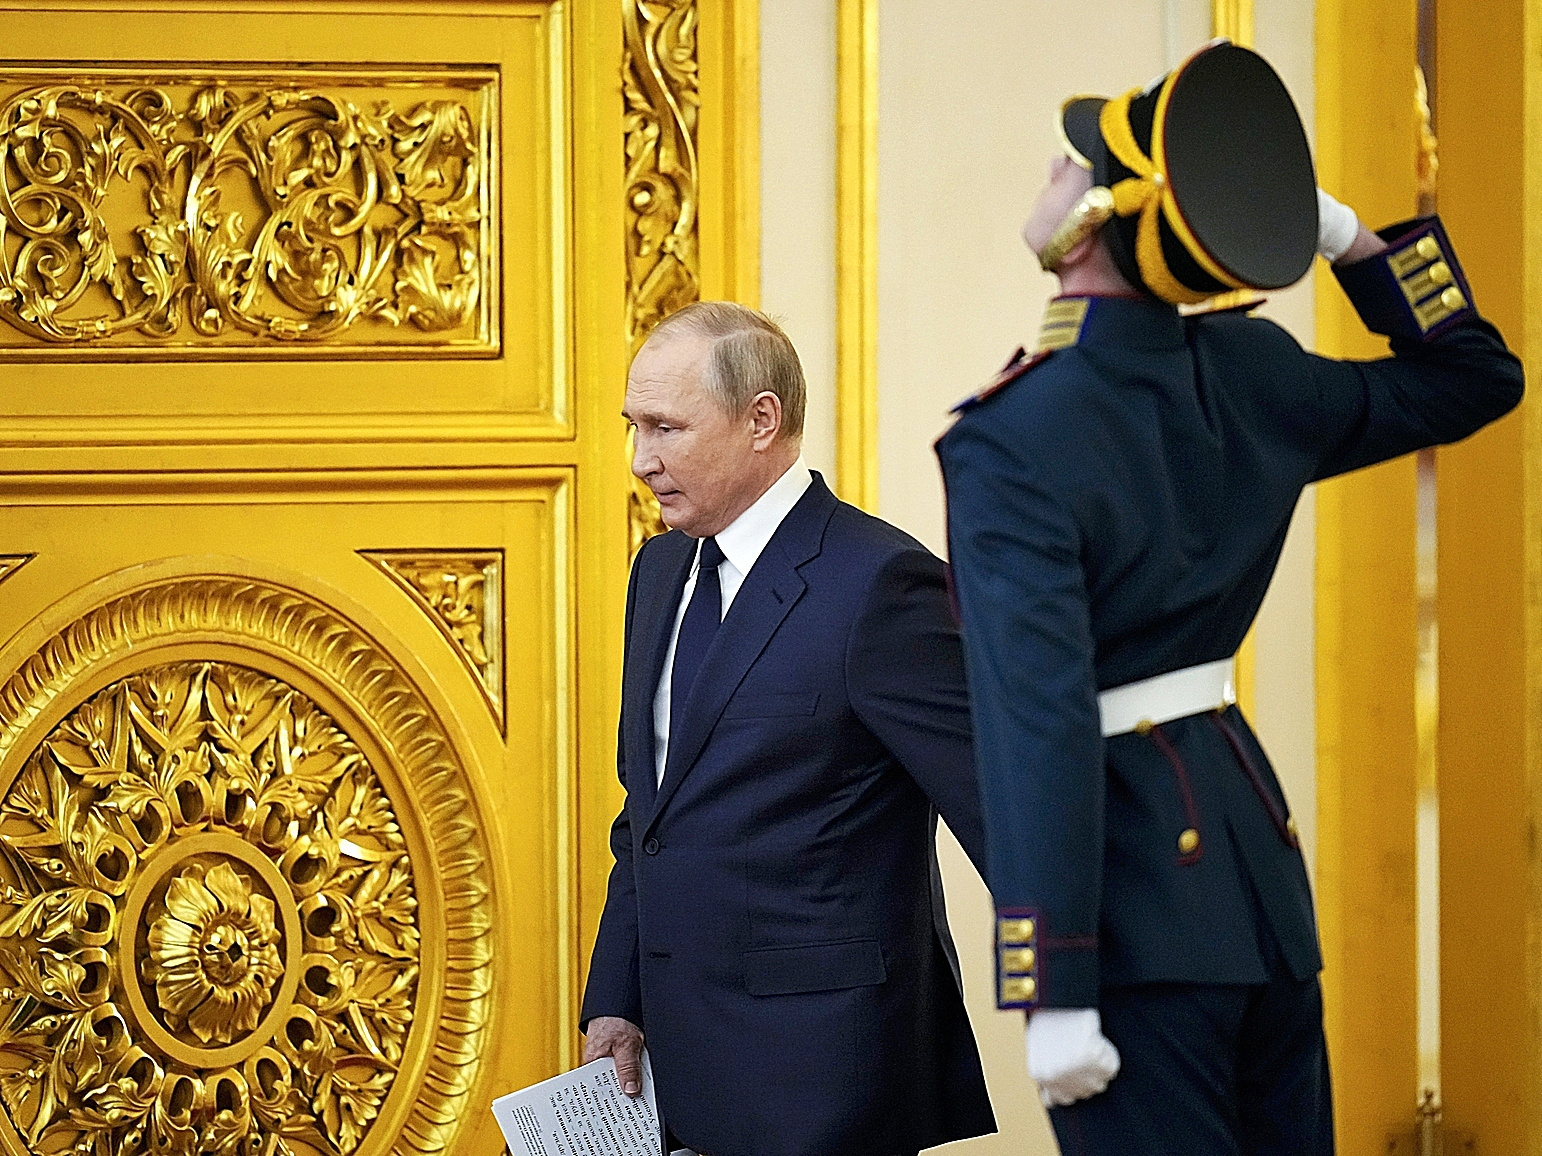 Vladimir Putin arrives in the Kremlin (Moscow) to deliver a speech.